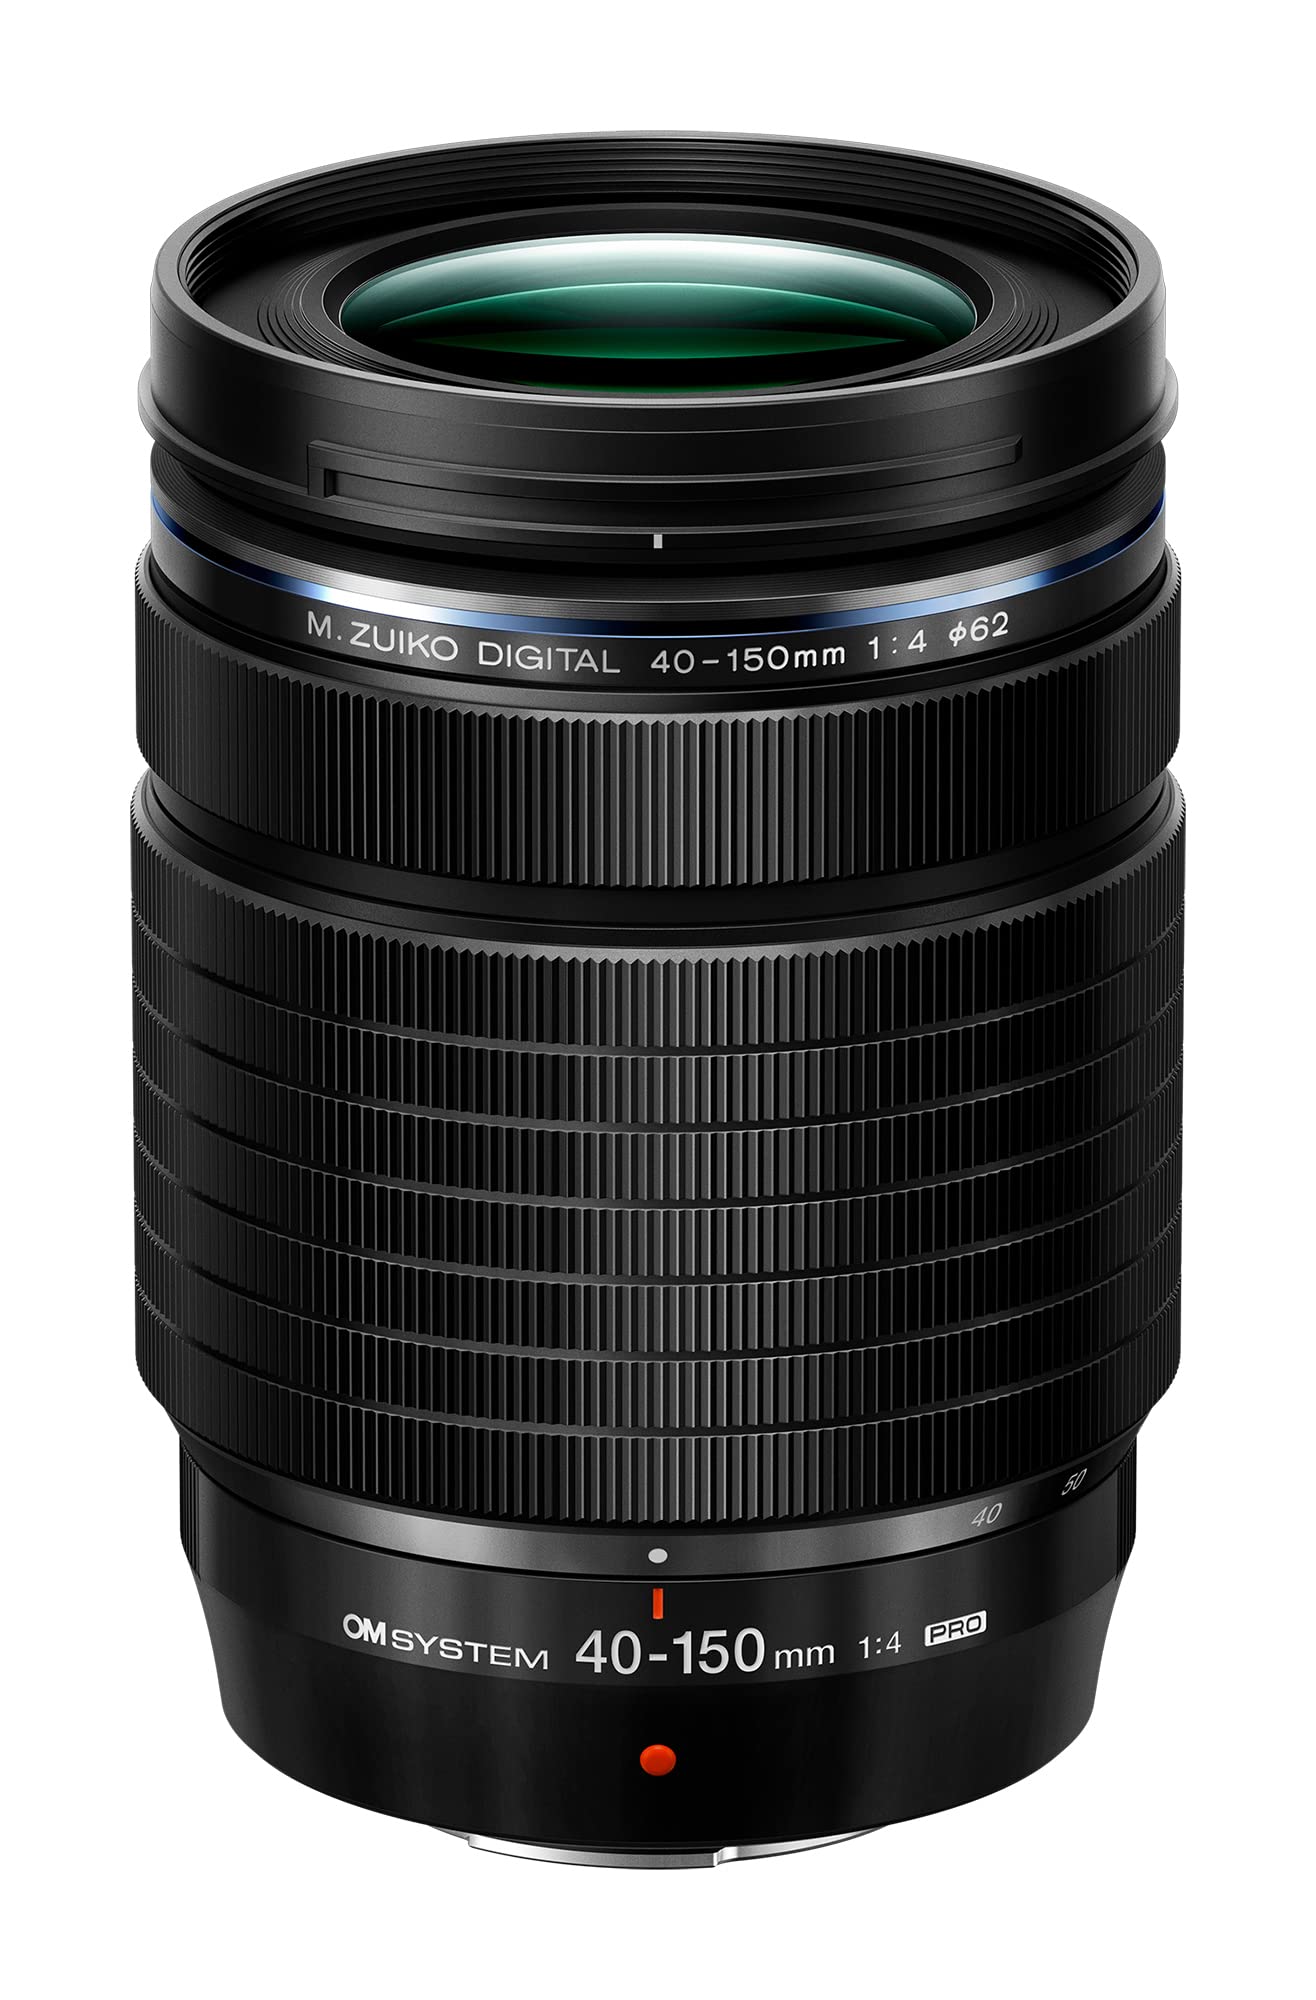 OM System M.Zuiko Digital ED 40-150mm F4.0 PRO for Micro Four Thirds System Camera Compact Powerful Zoom Weather Sealed Design Fluorine Coating